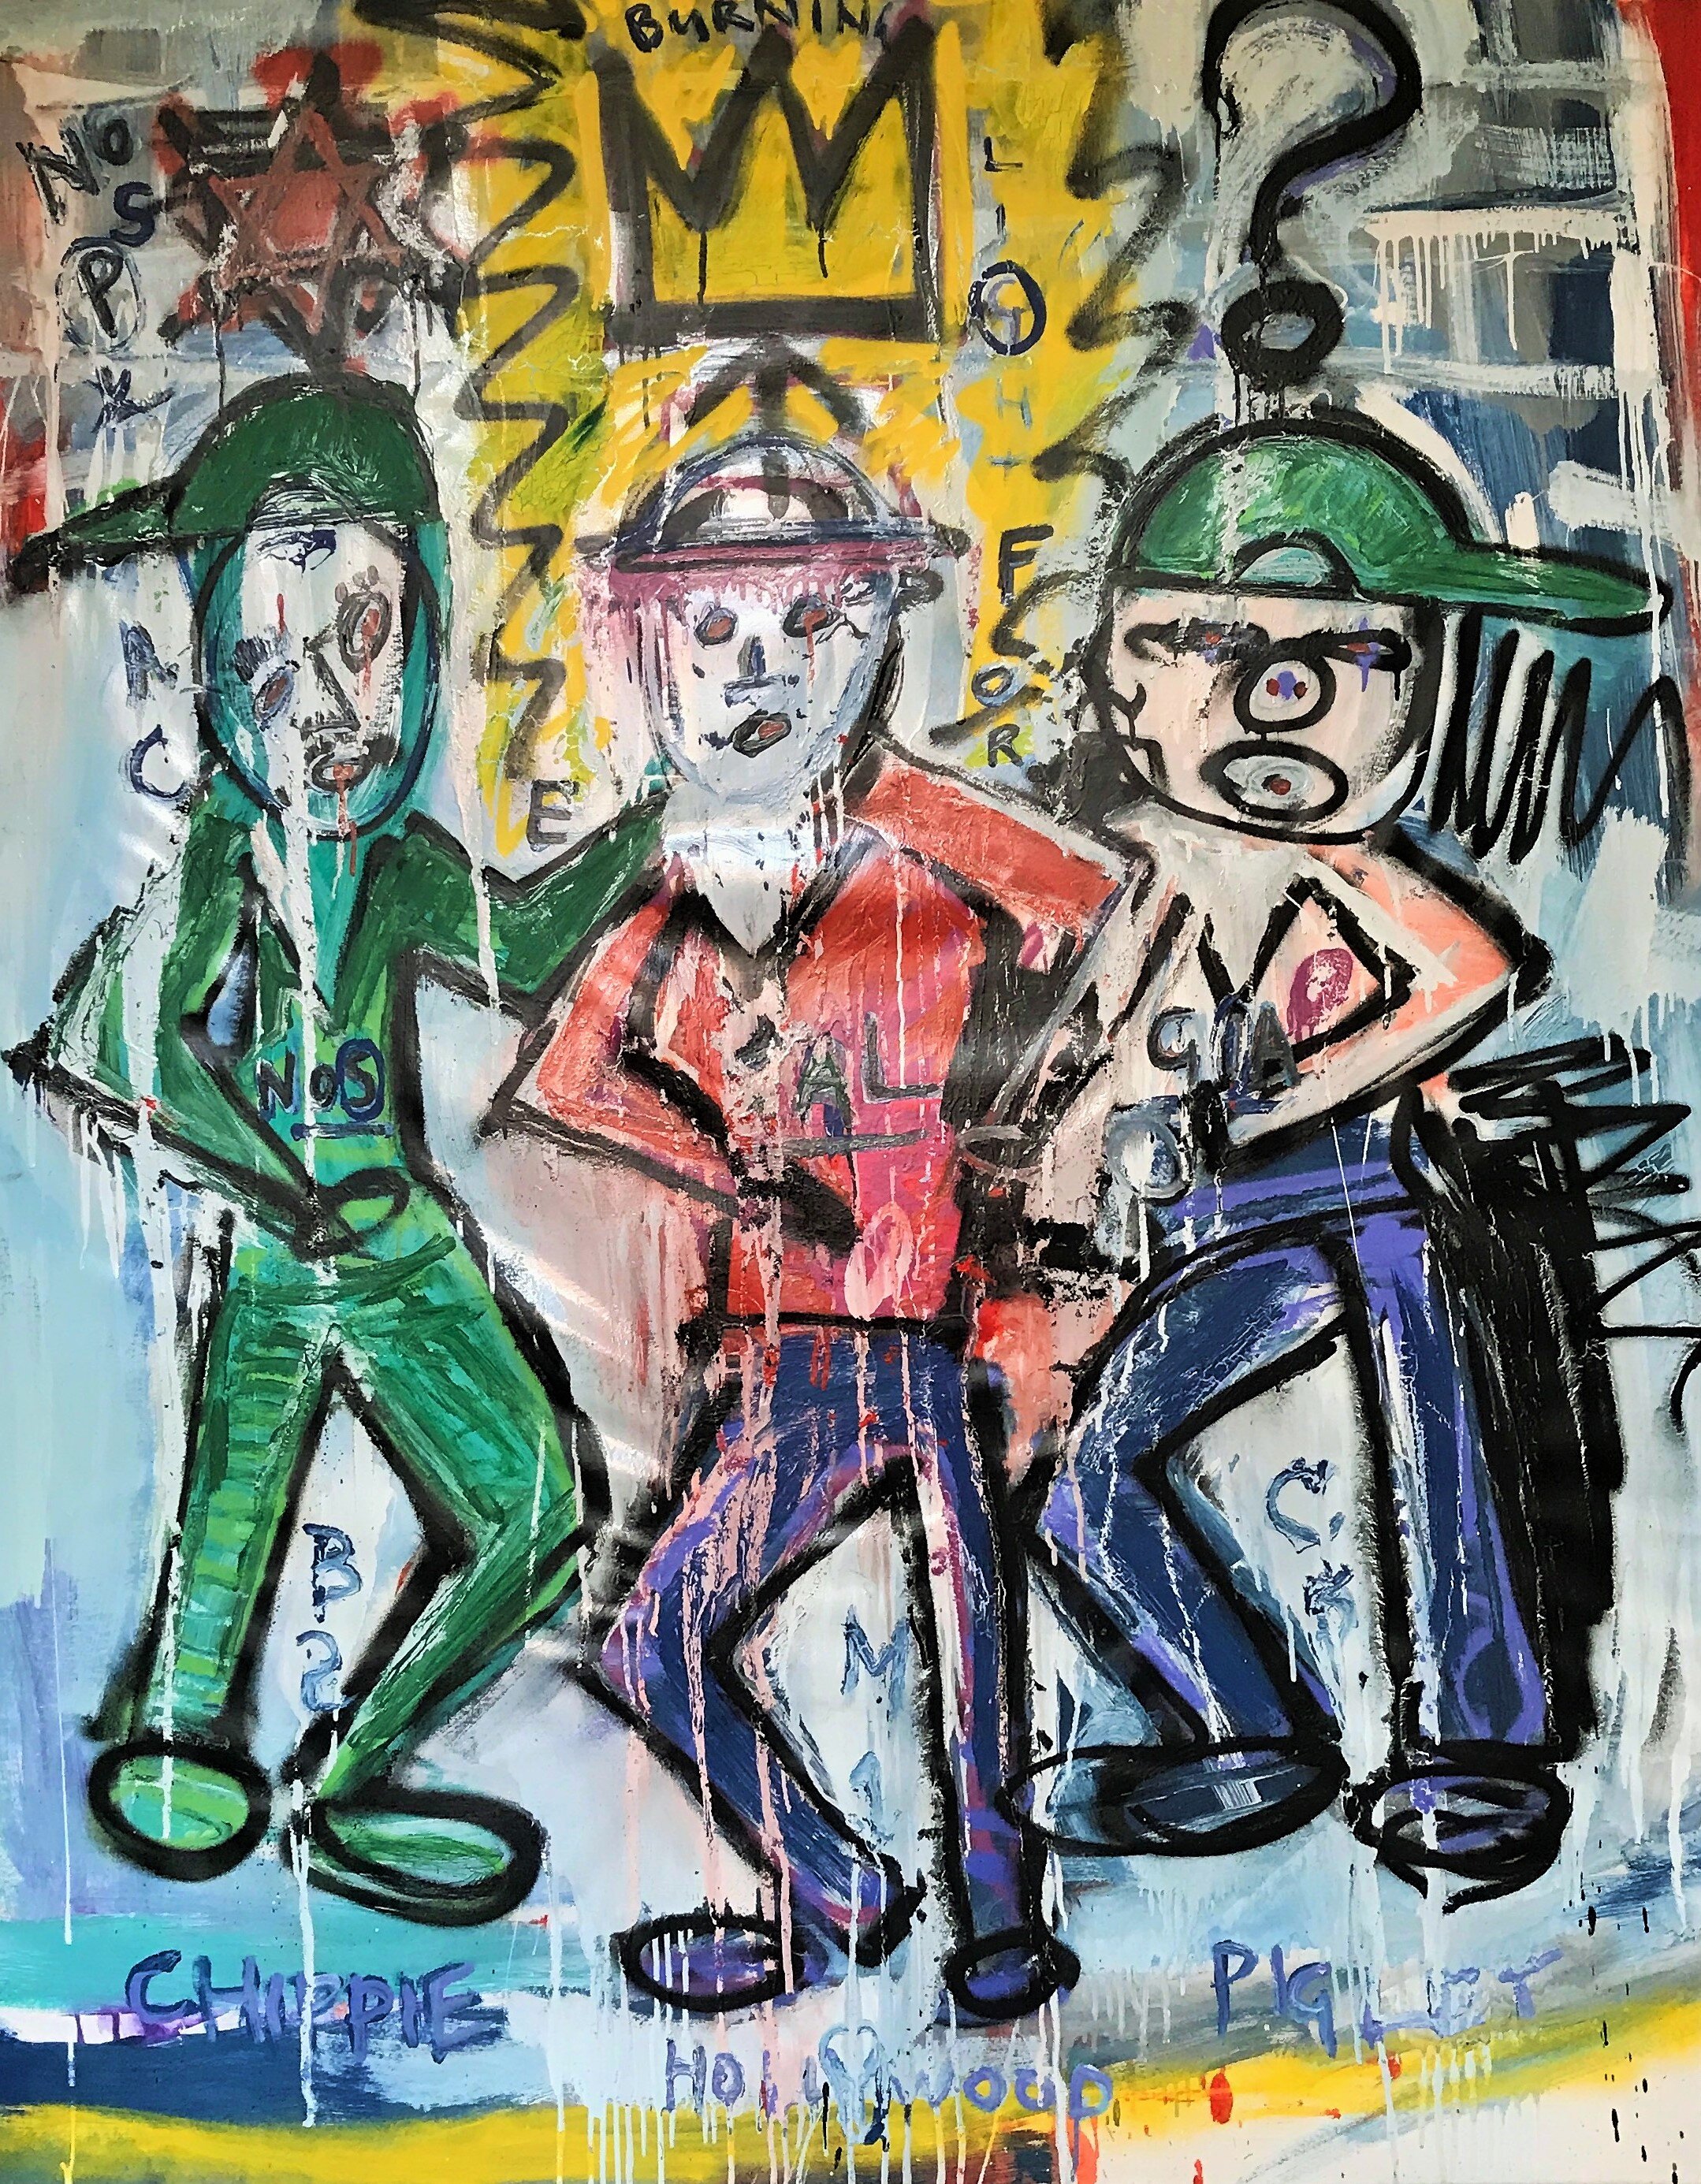 "No Space For Nostalgia" a painting about childhood by Irish artist featuring his 2 childhood friends including the "superstar" footballer wearing the crown in the centre of the painting (Copy) (Copy)